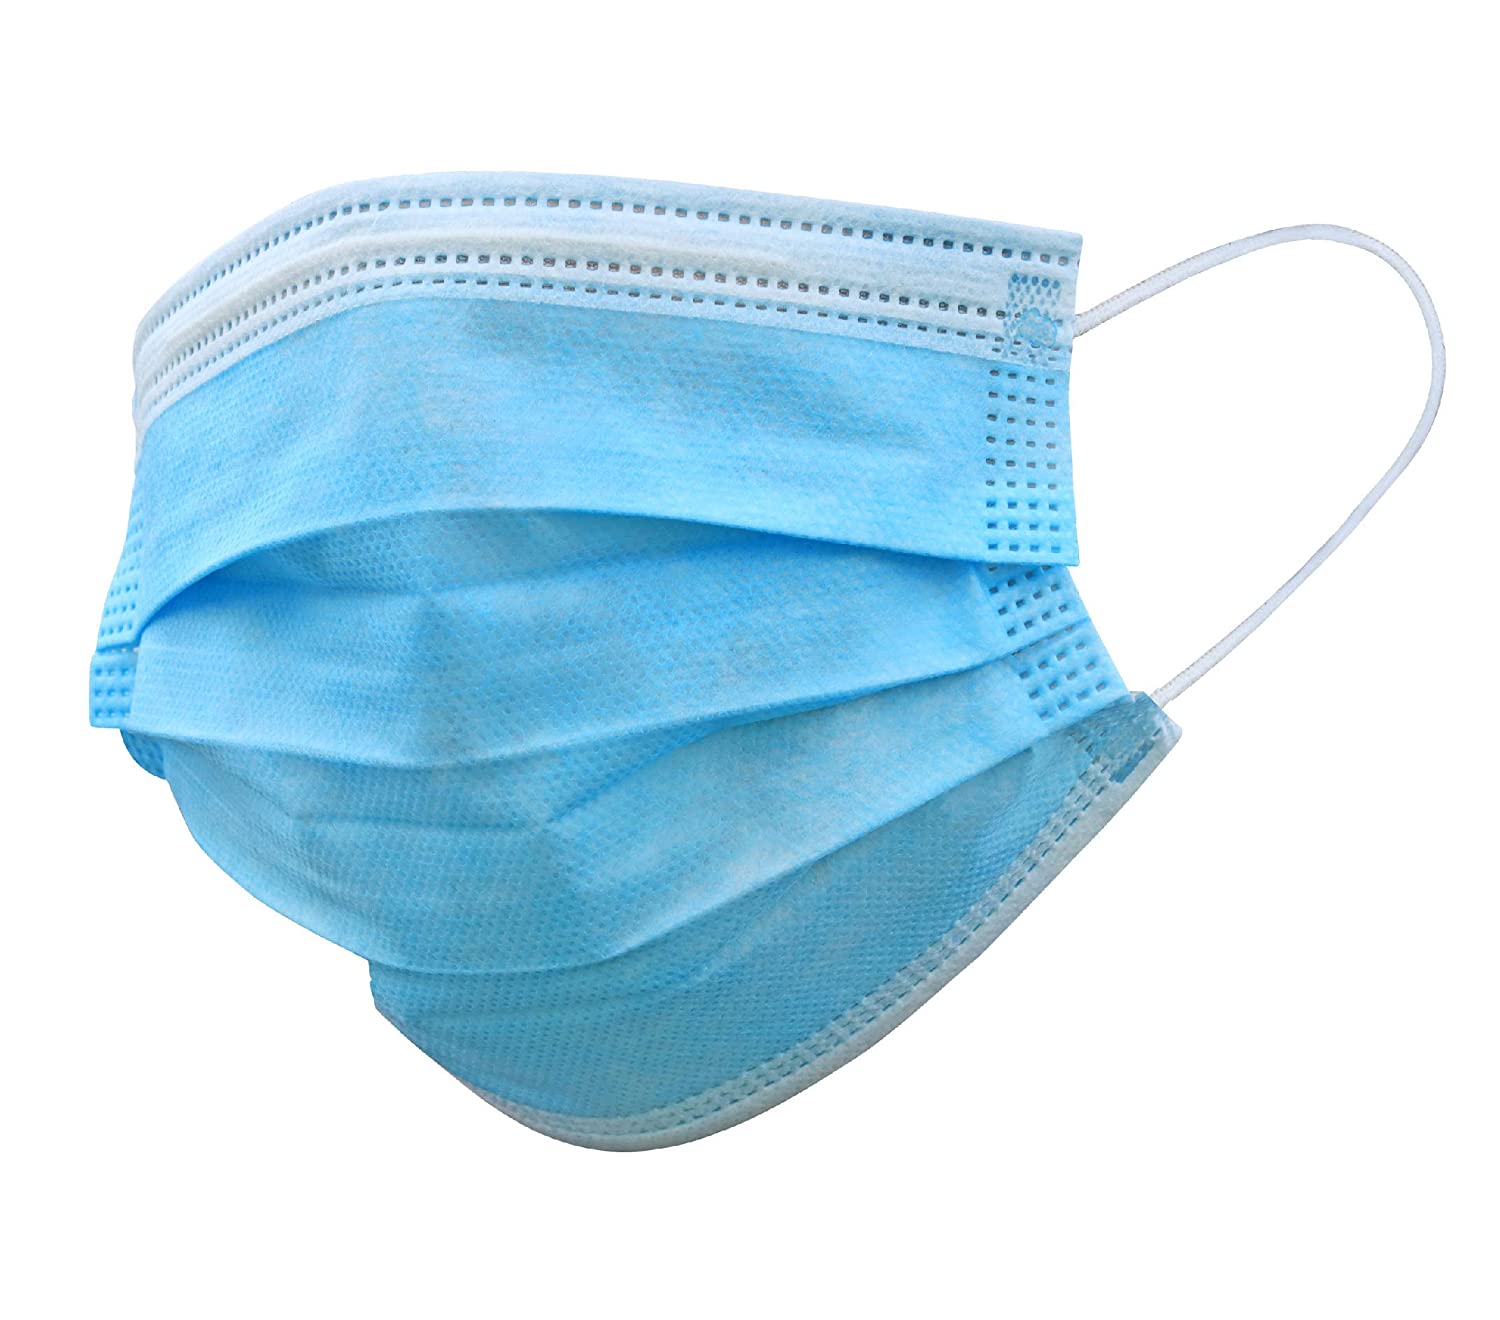 SFDA: Requirements for Medical Masks and Particulate Respirators | RegDesk